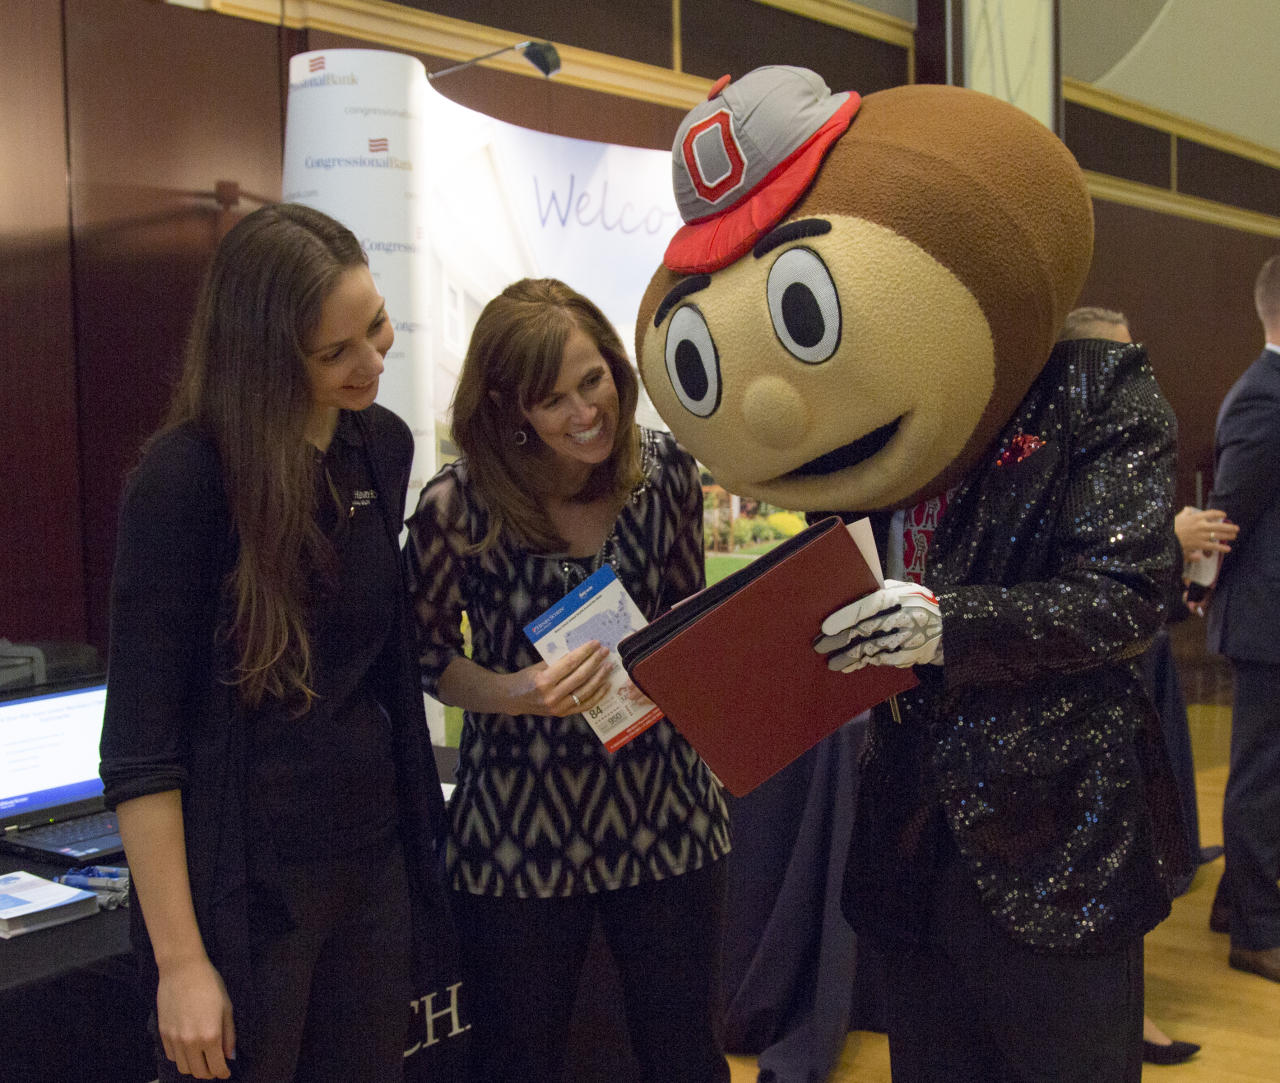 Brutus sharing his resume with employers